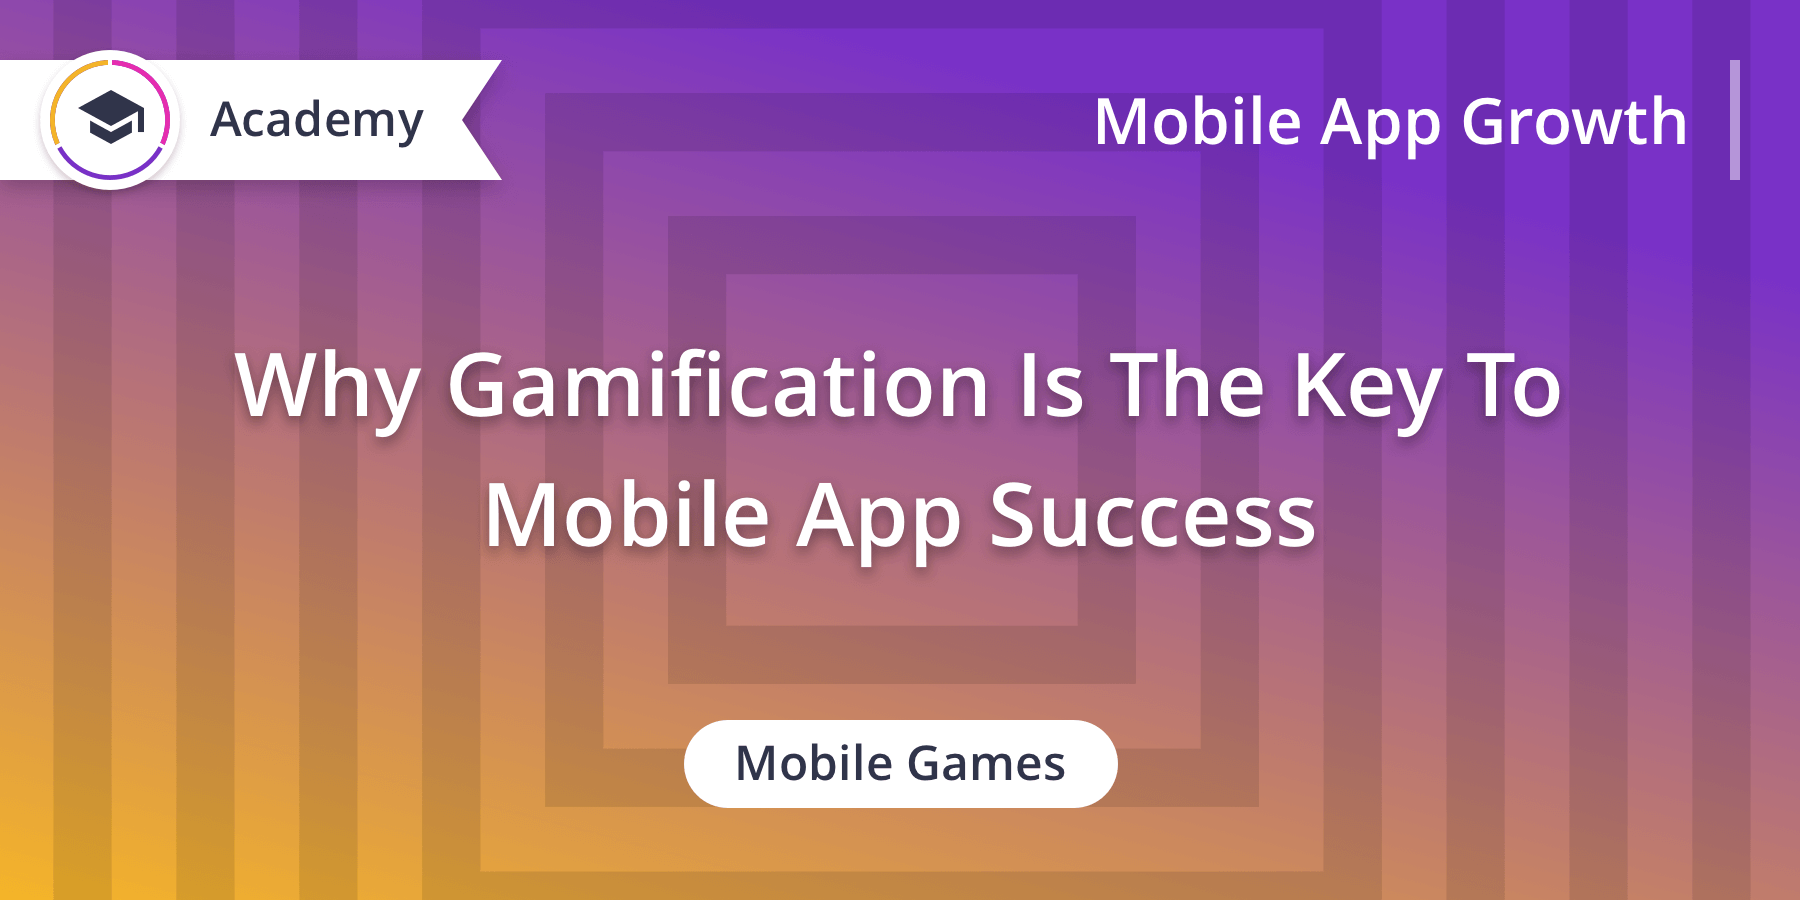 Why Gamified Apps Consistently Outplay The Competition